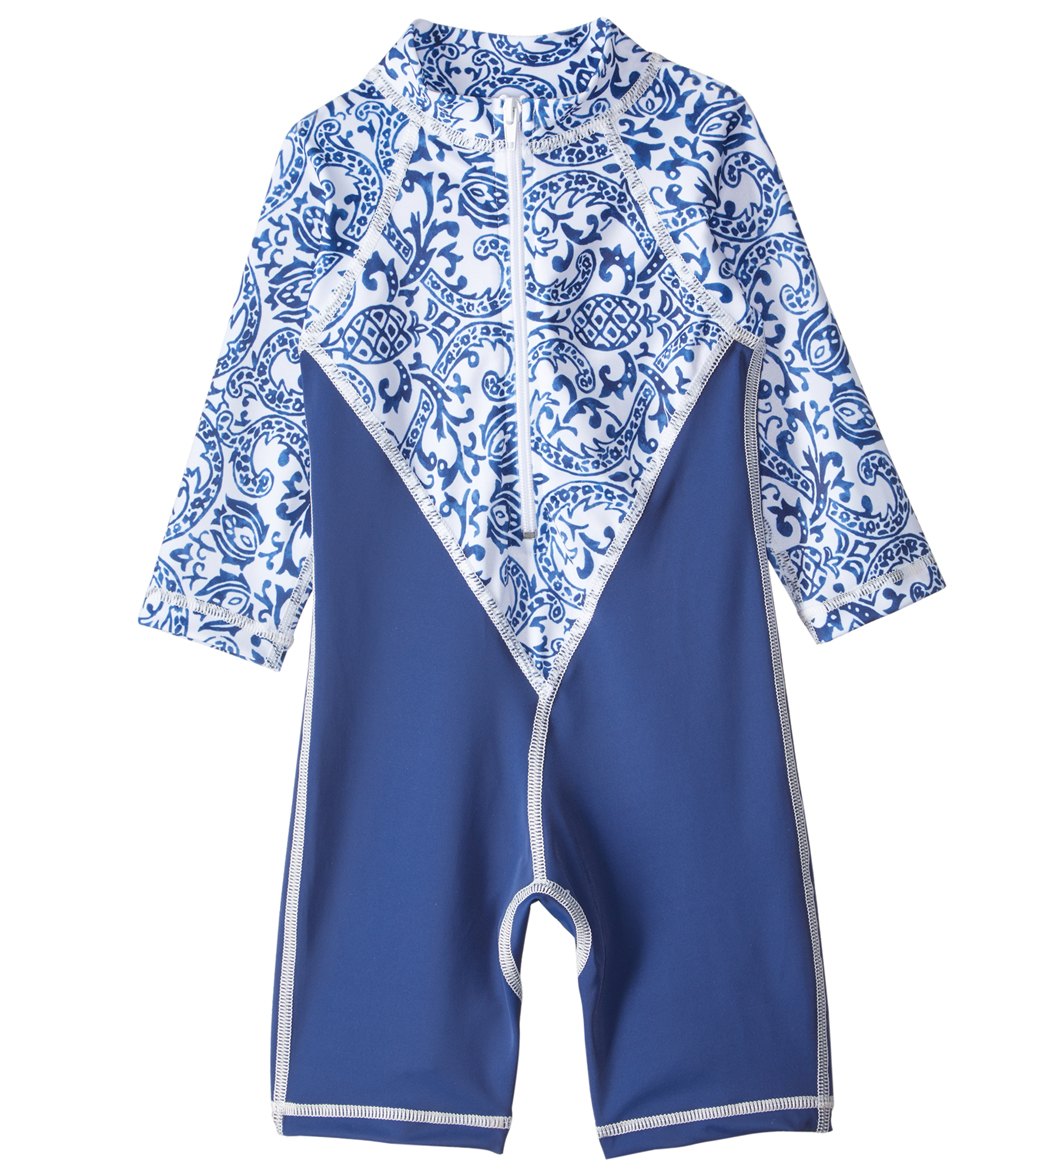 Tidepools Girls' Pineapple Uv 50+ Suit Baby - Navy/White Large 12-18 Months Lycra®/Polyester - Swimoutlet.com